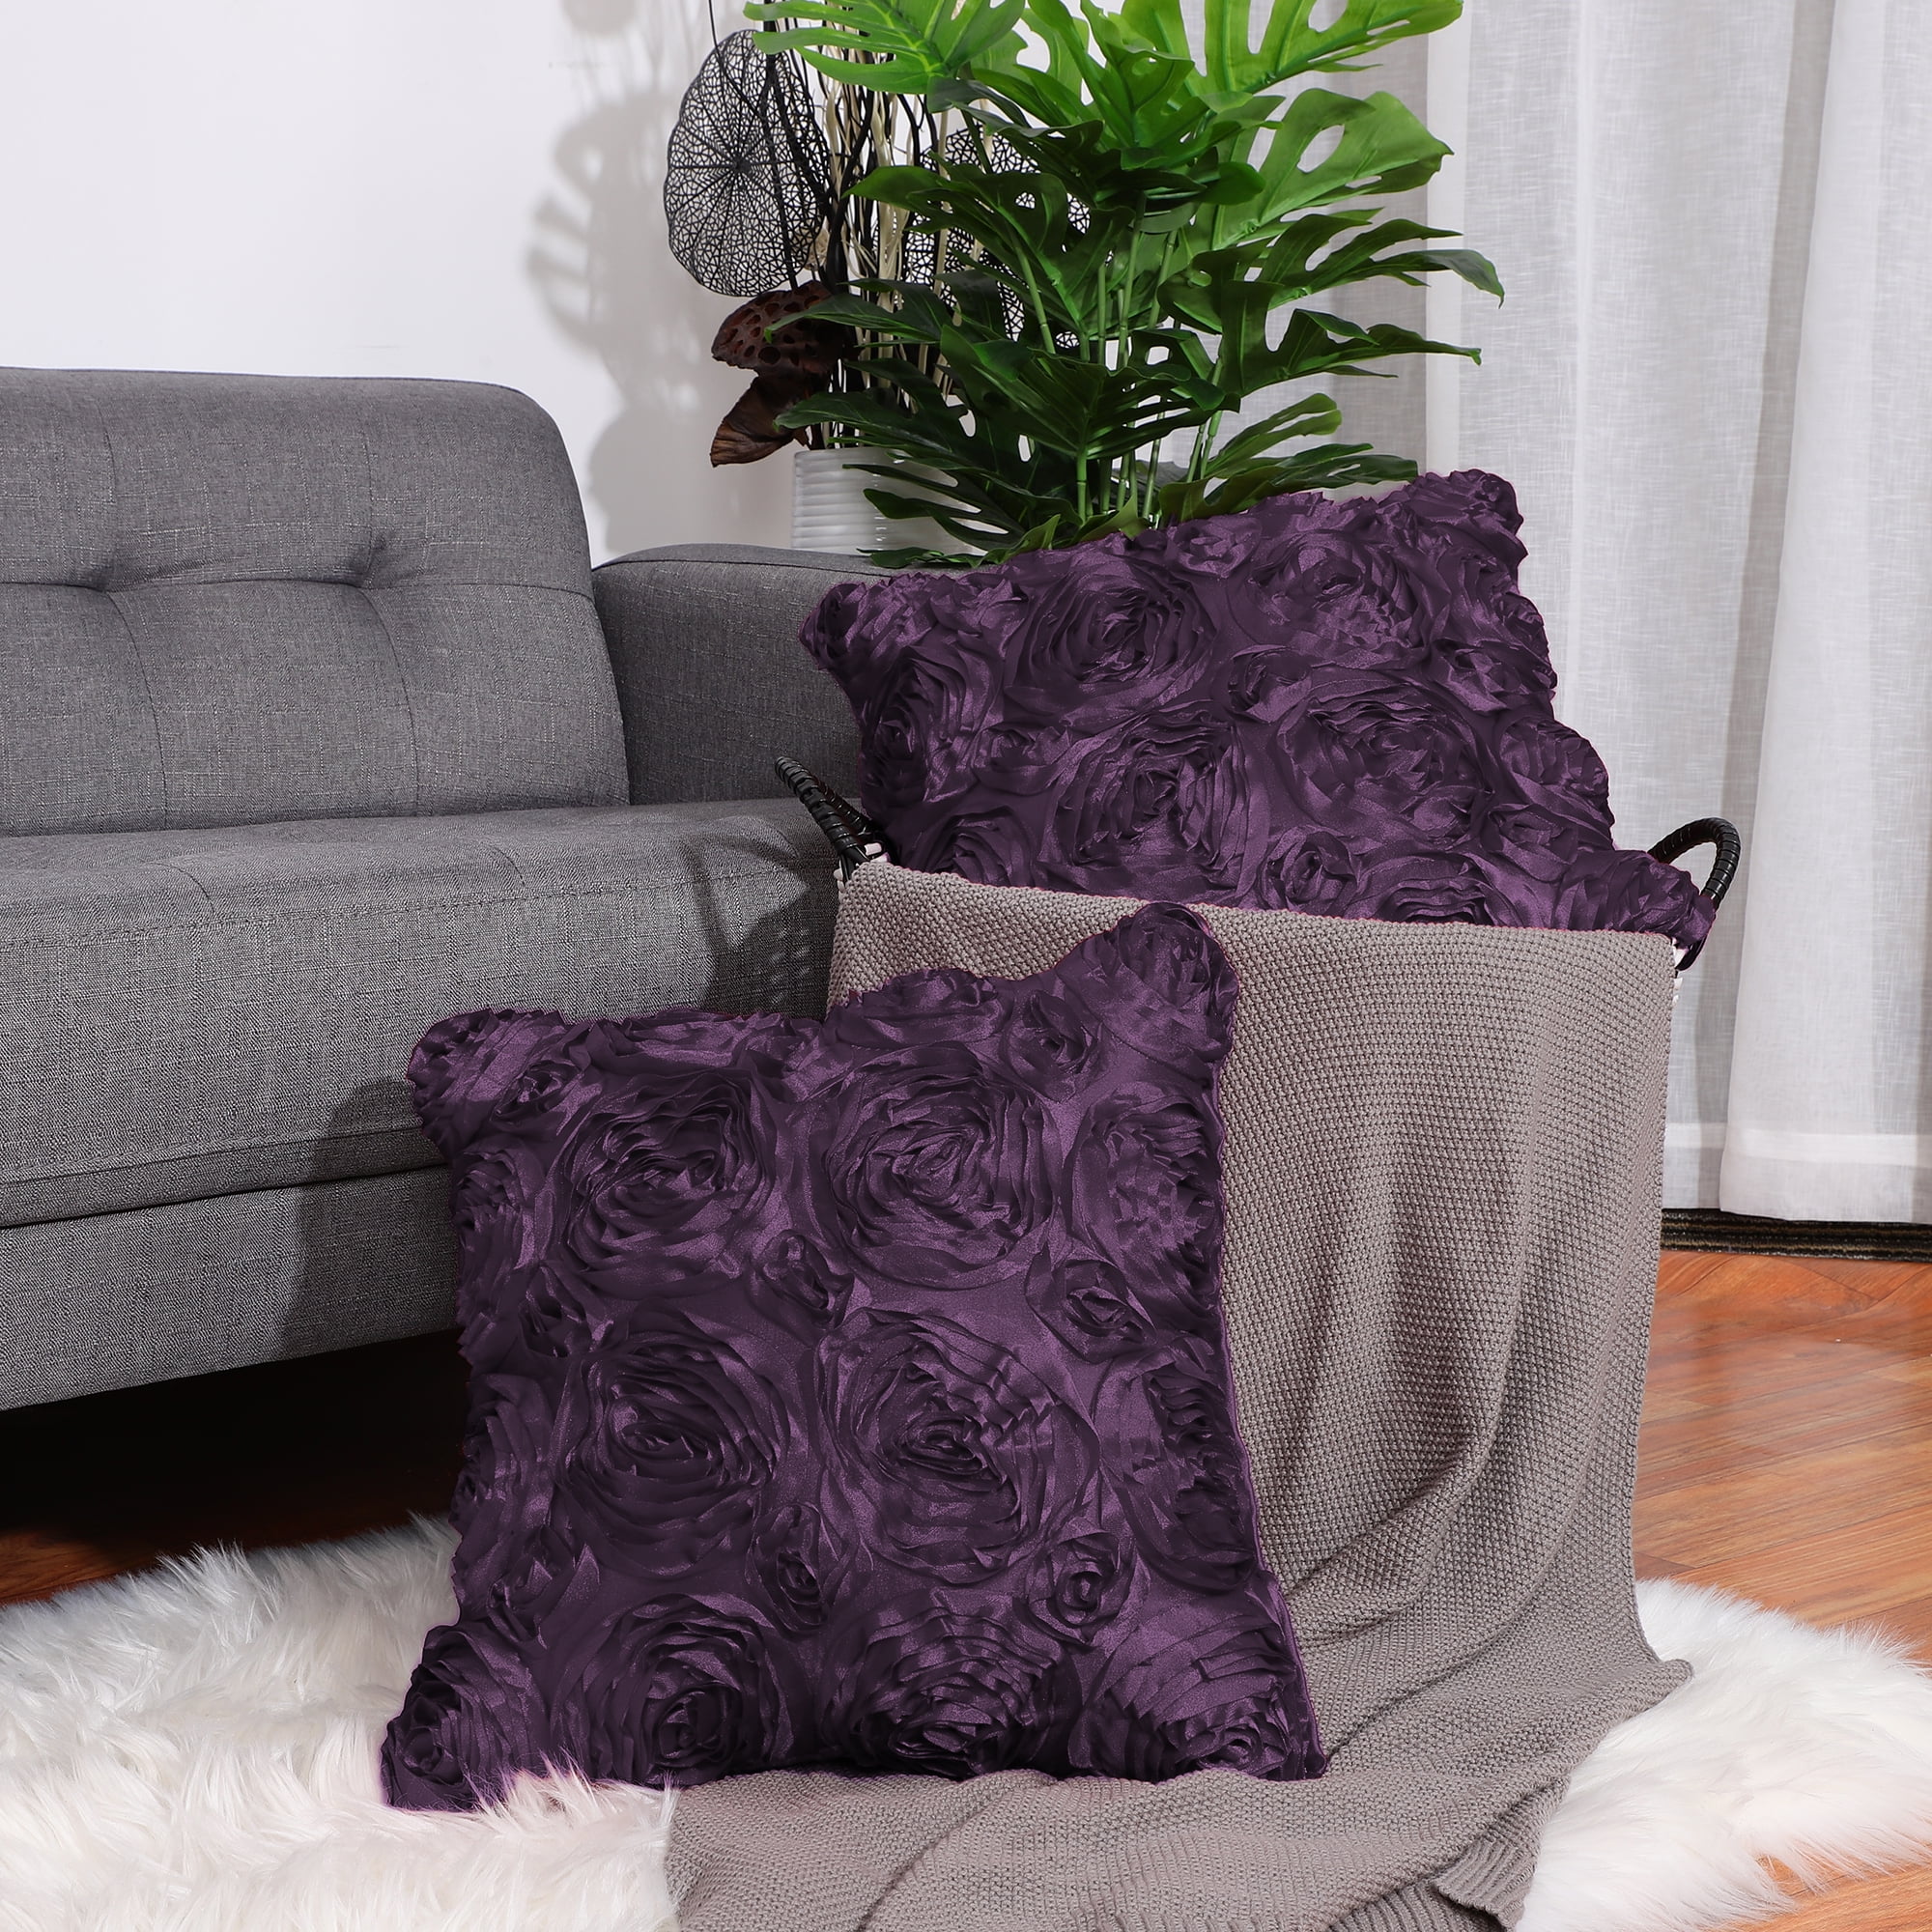 2Pcs Deep Purple Cushion Cover Case Shell Couch Sofa Home Decor Roses Floral 20/"